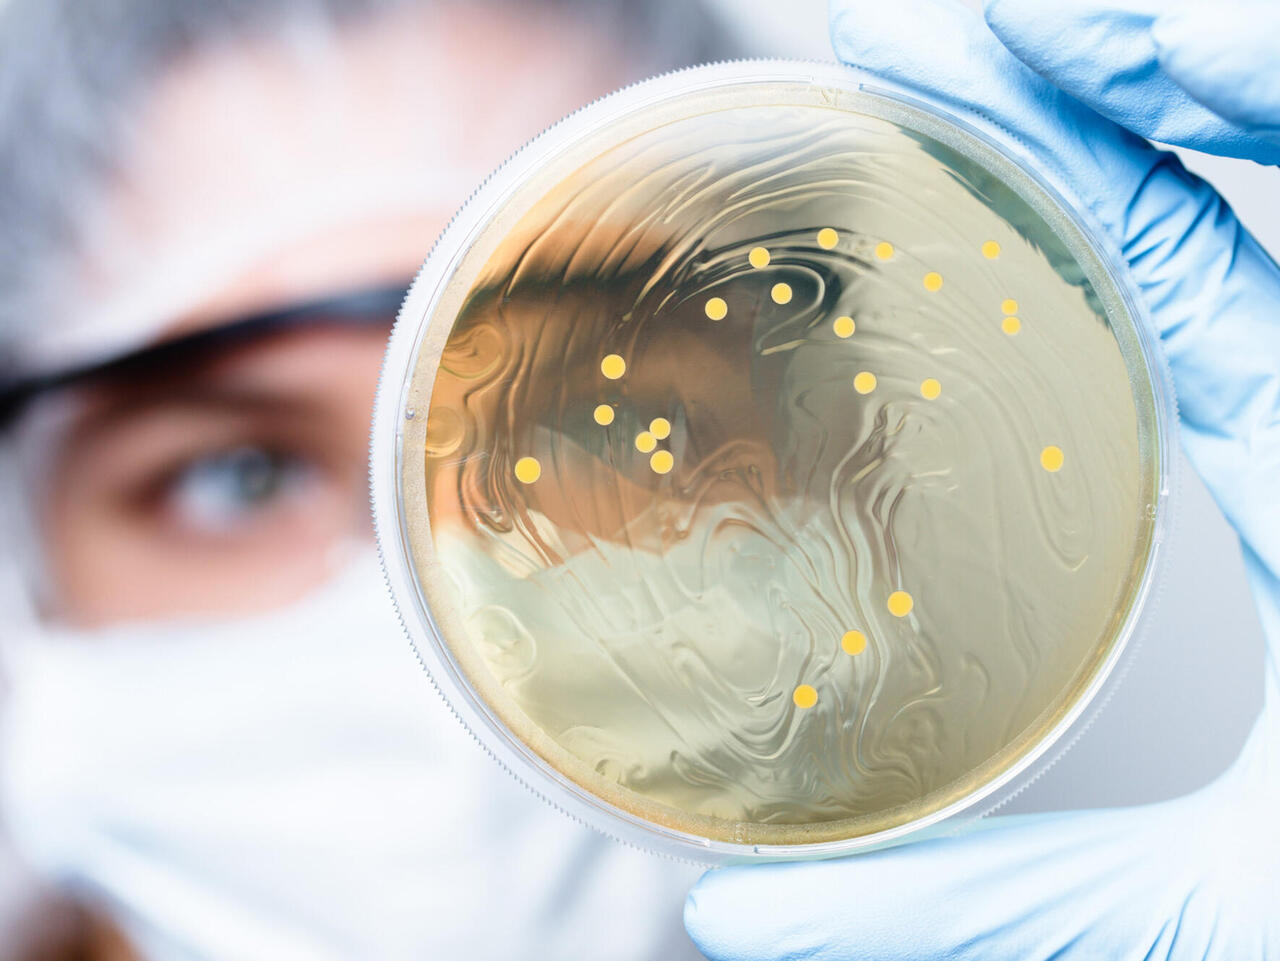 Researcher in the background with petri dish with bacteria in hand (foreground)